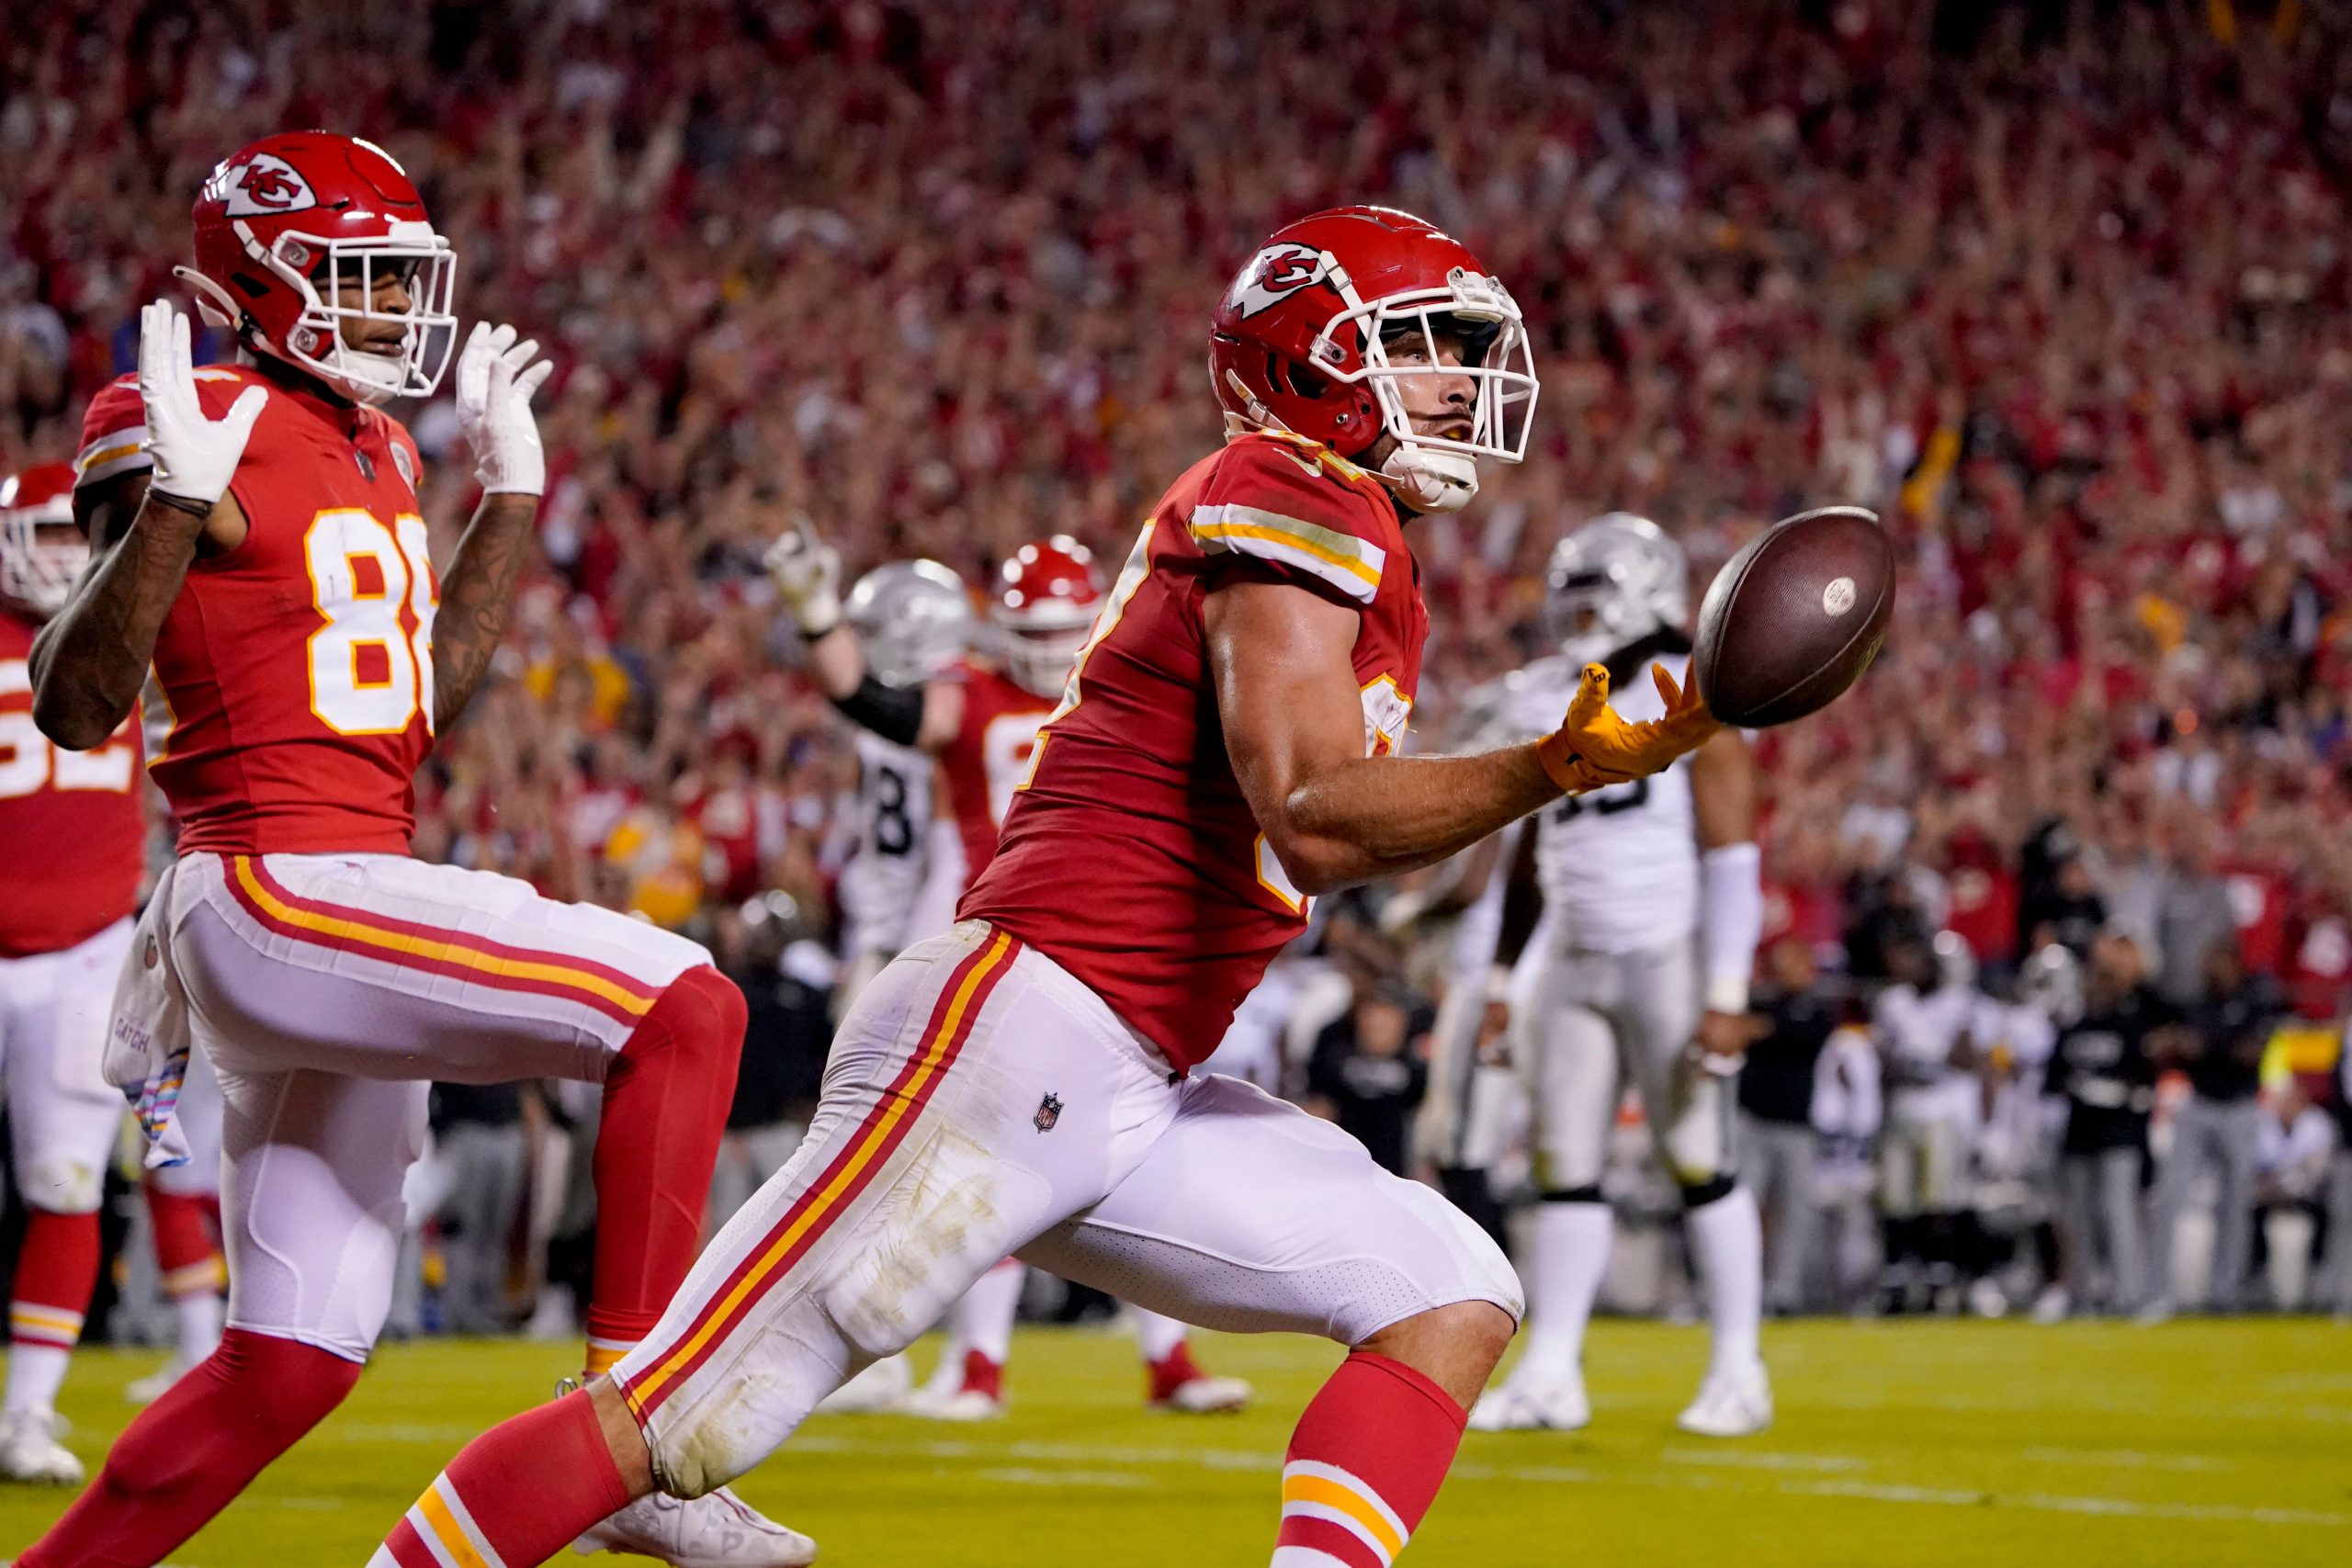 NFL 2022: Kansas City Chiefs’ Travis Kelce becomes first TE since 1985 to score 4 TDs in a game vs Raiders